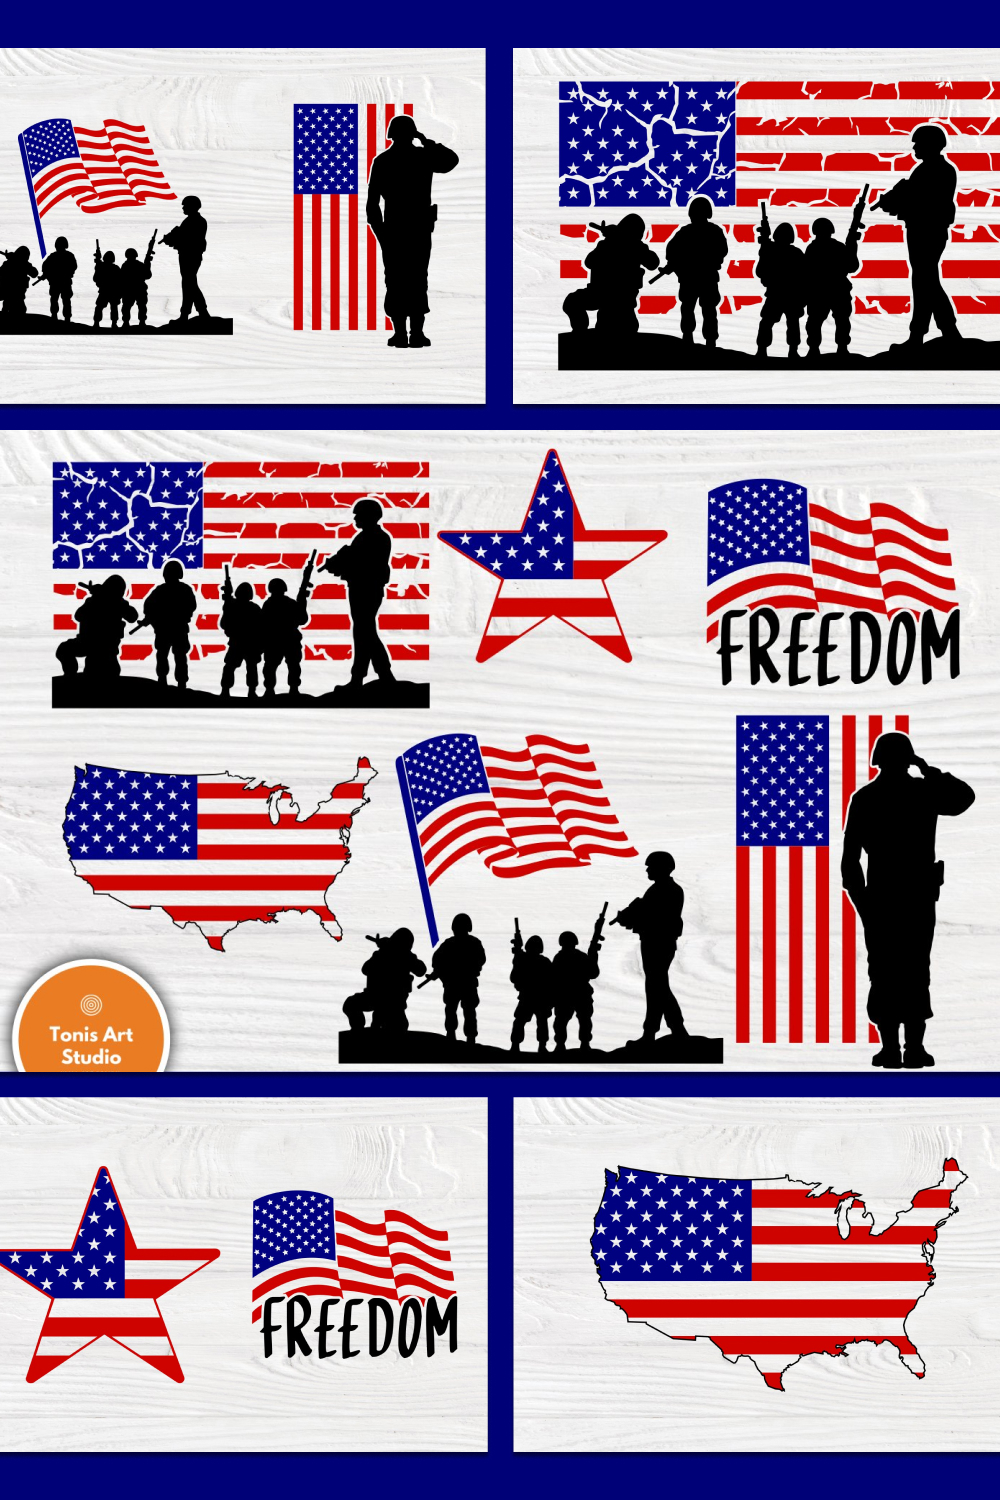 Different symbols of freedom in American.